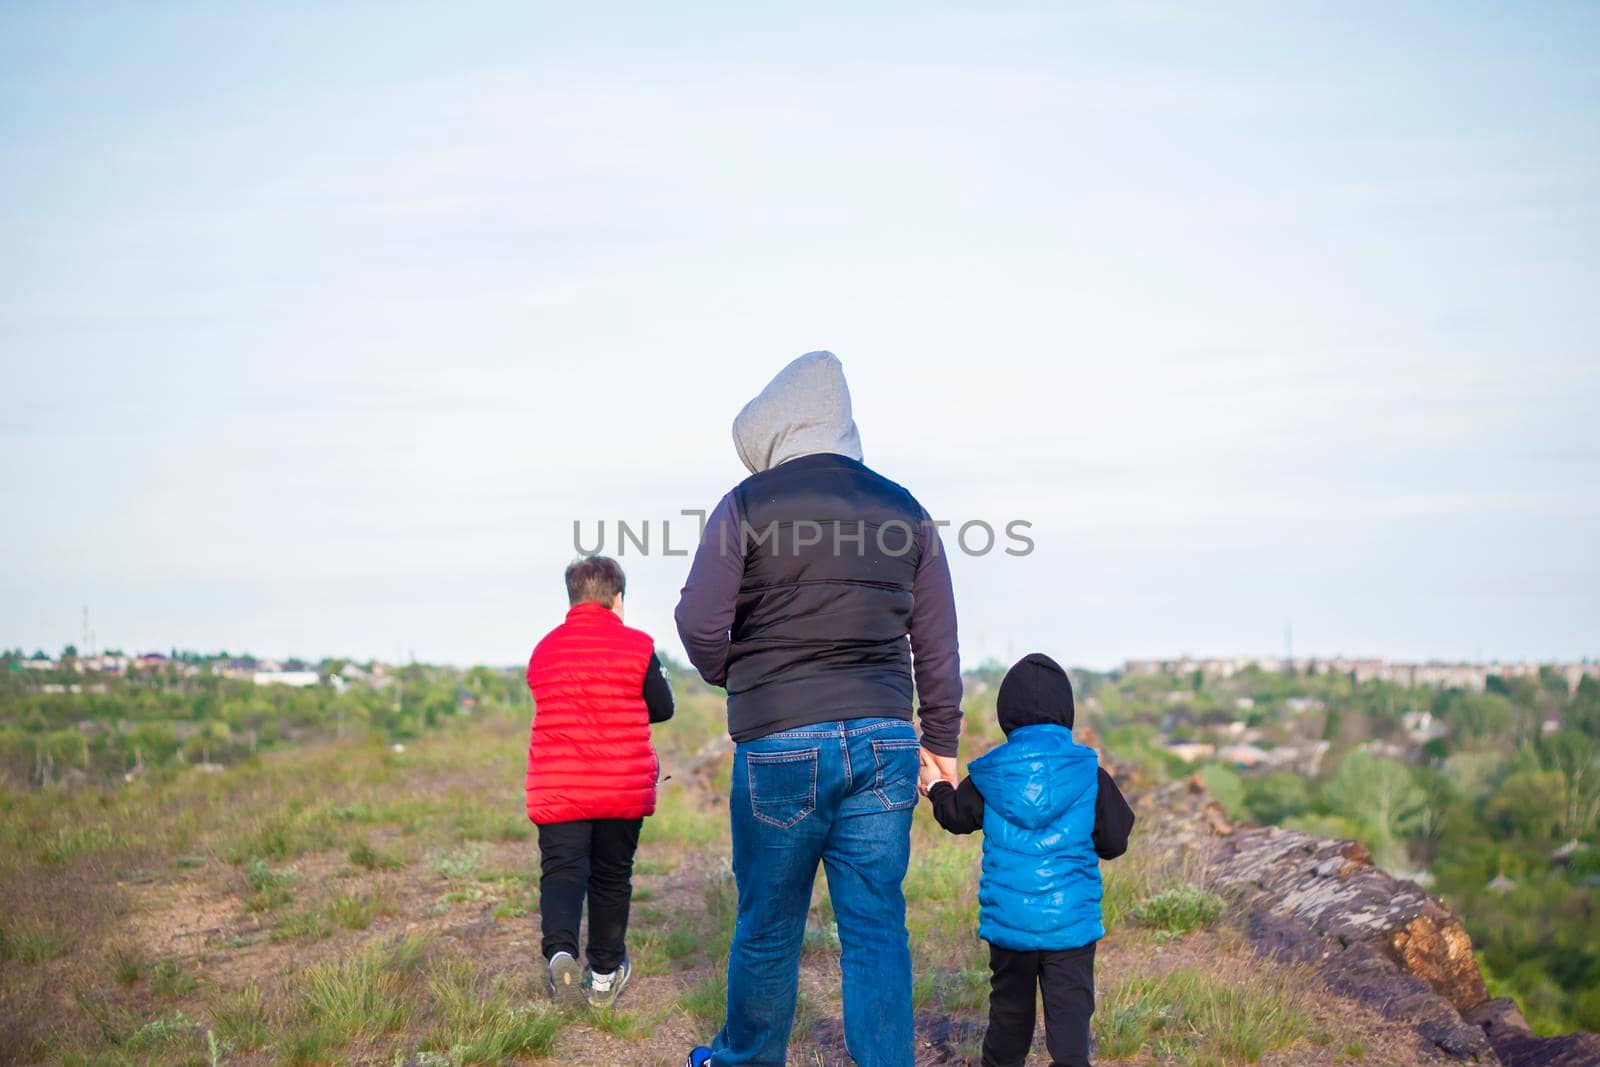 A man and children are standing on a rock and watching what is happening below. panoramic view from above. Russia, Rostov region, skelevataya skala, the 7th wonder of the Don world. Landscape